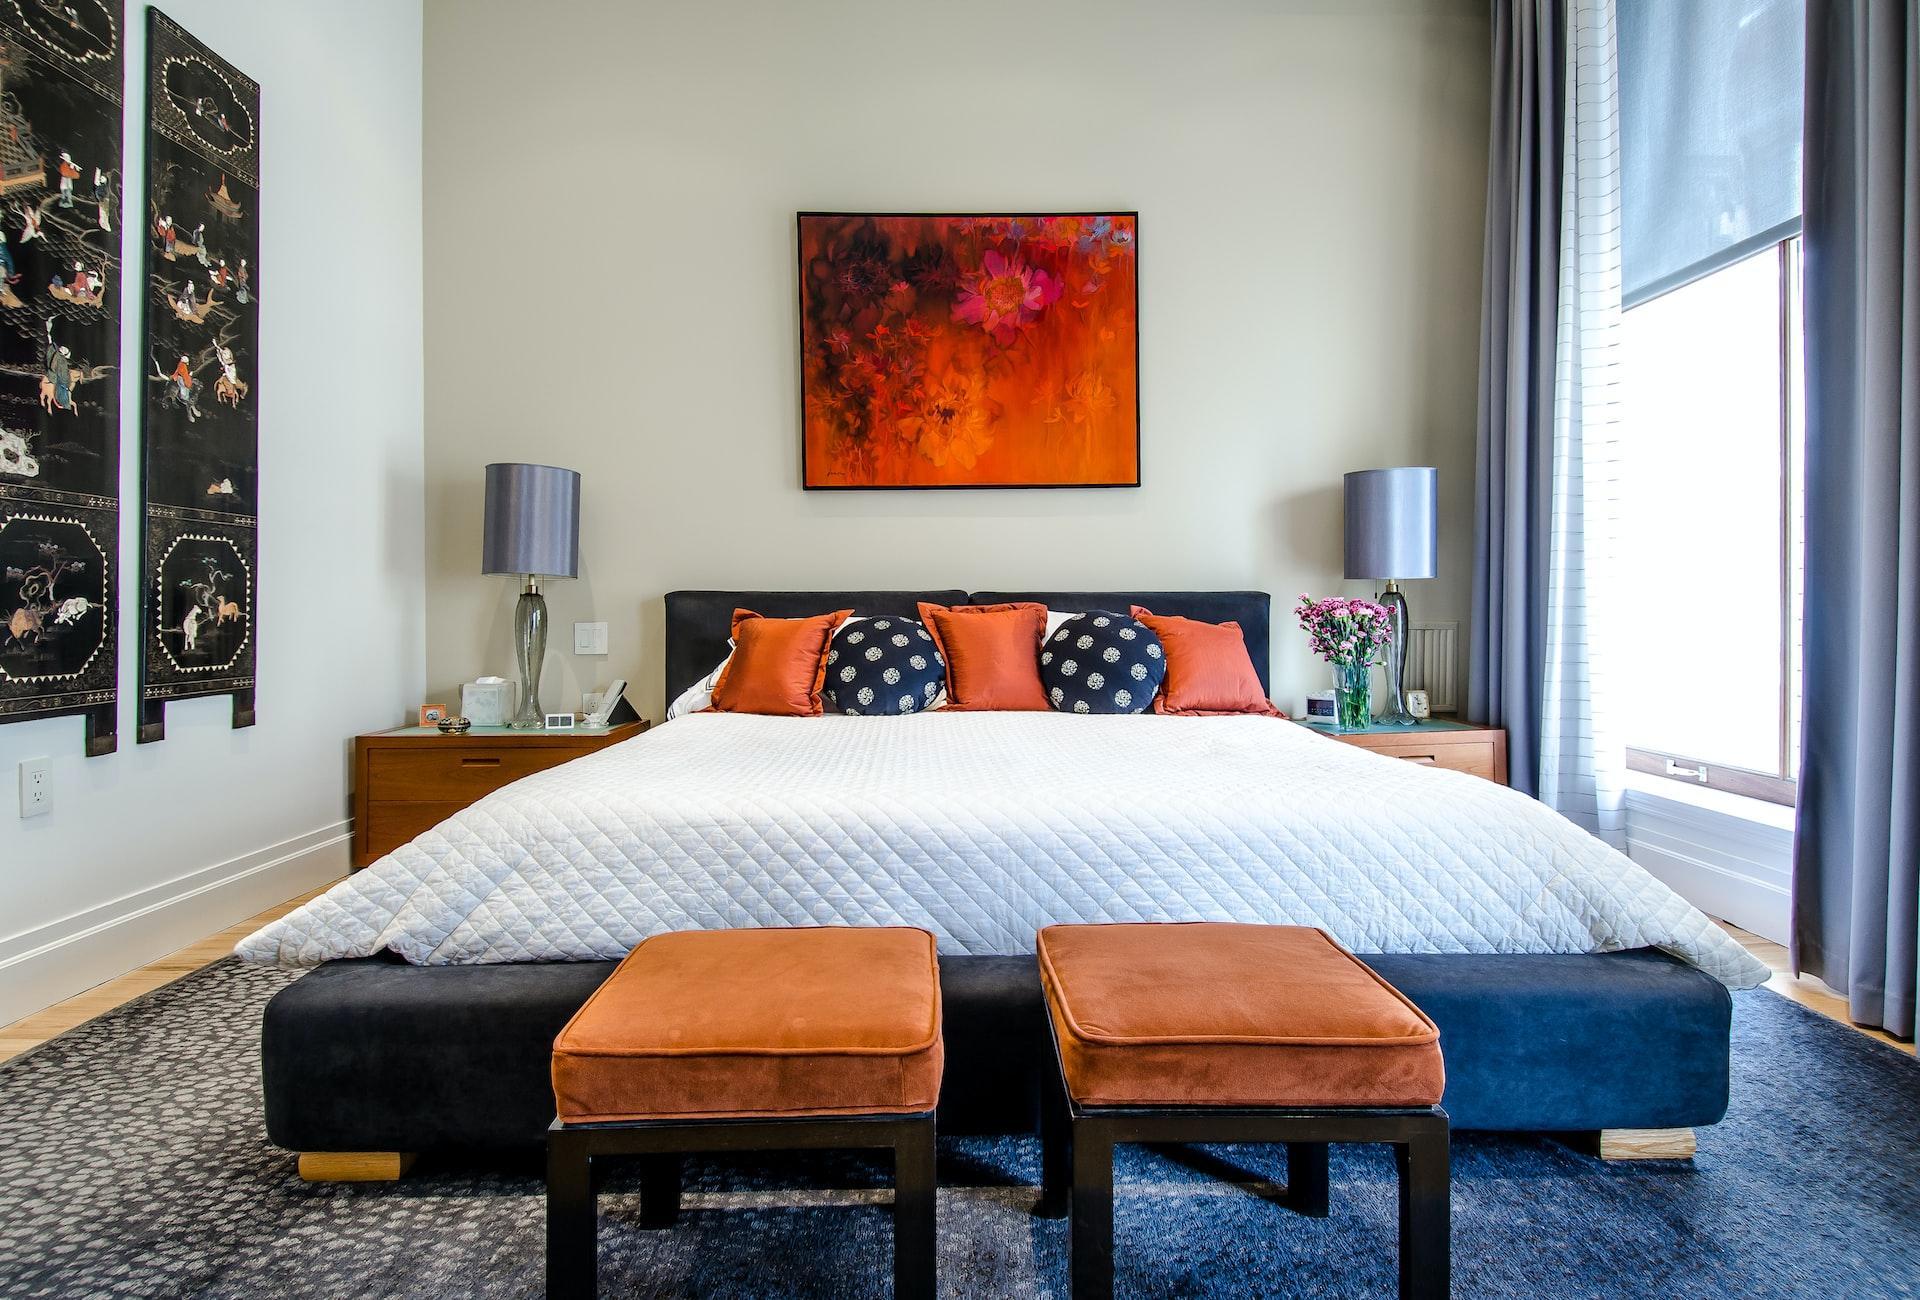 Six Easy Ways to Combine Function and Style in the Bedroom